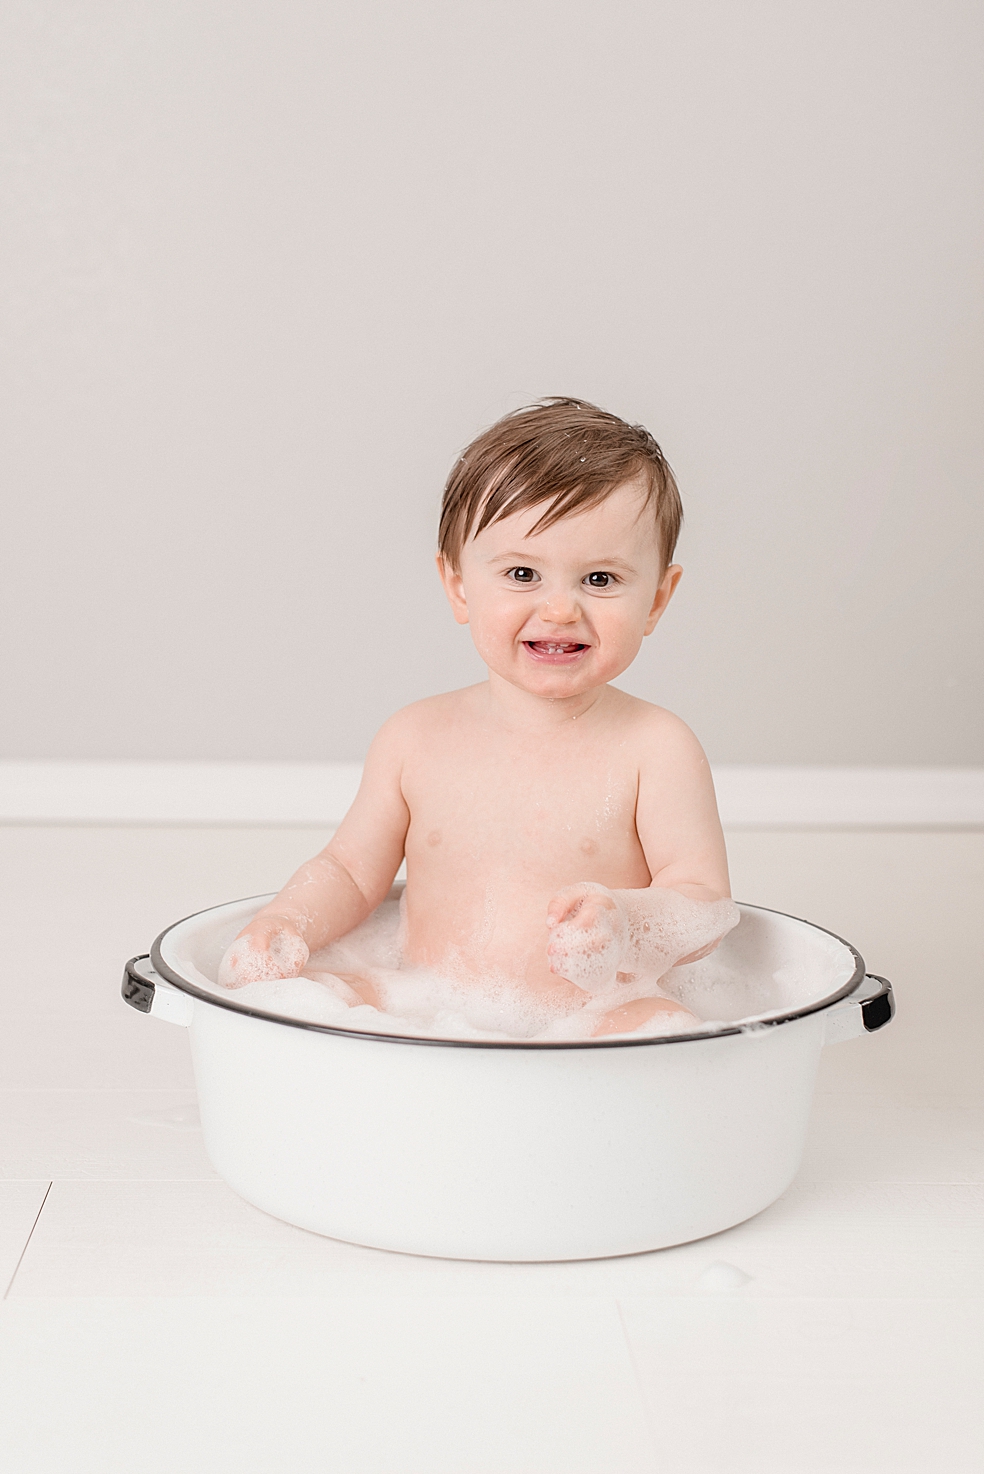 Baby boy in a bathtub smiling | Photo by Jessica Lee Photography